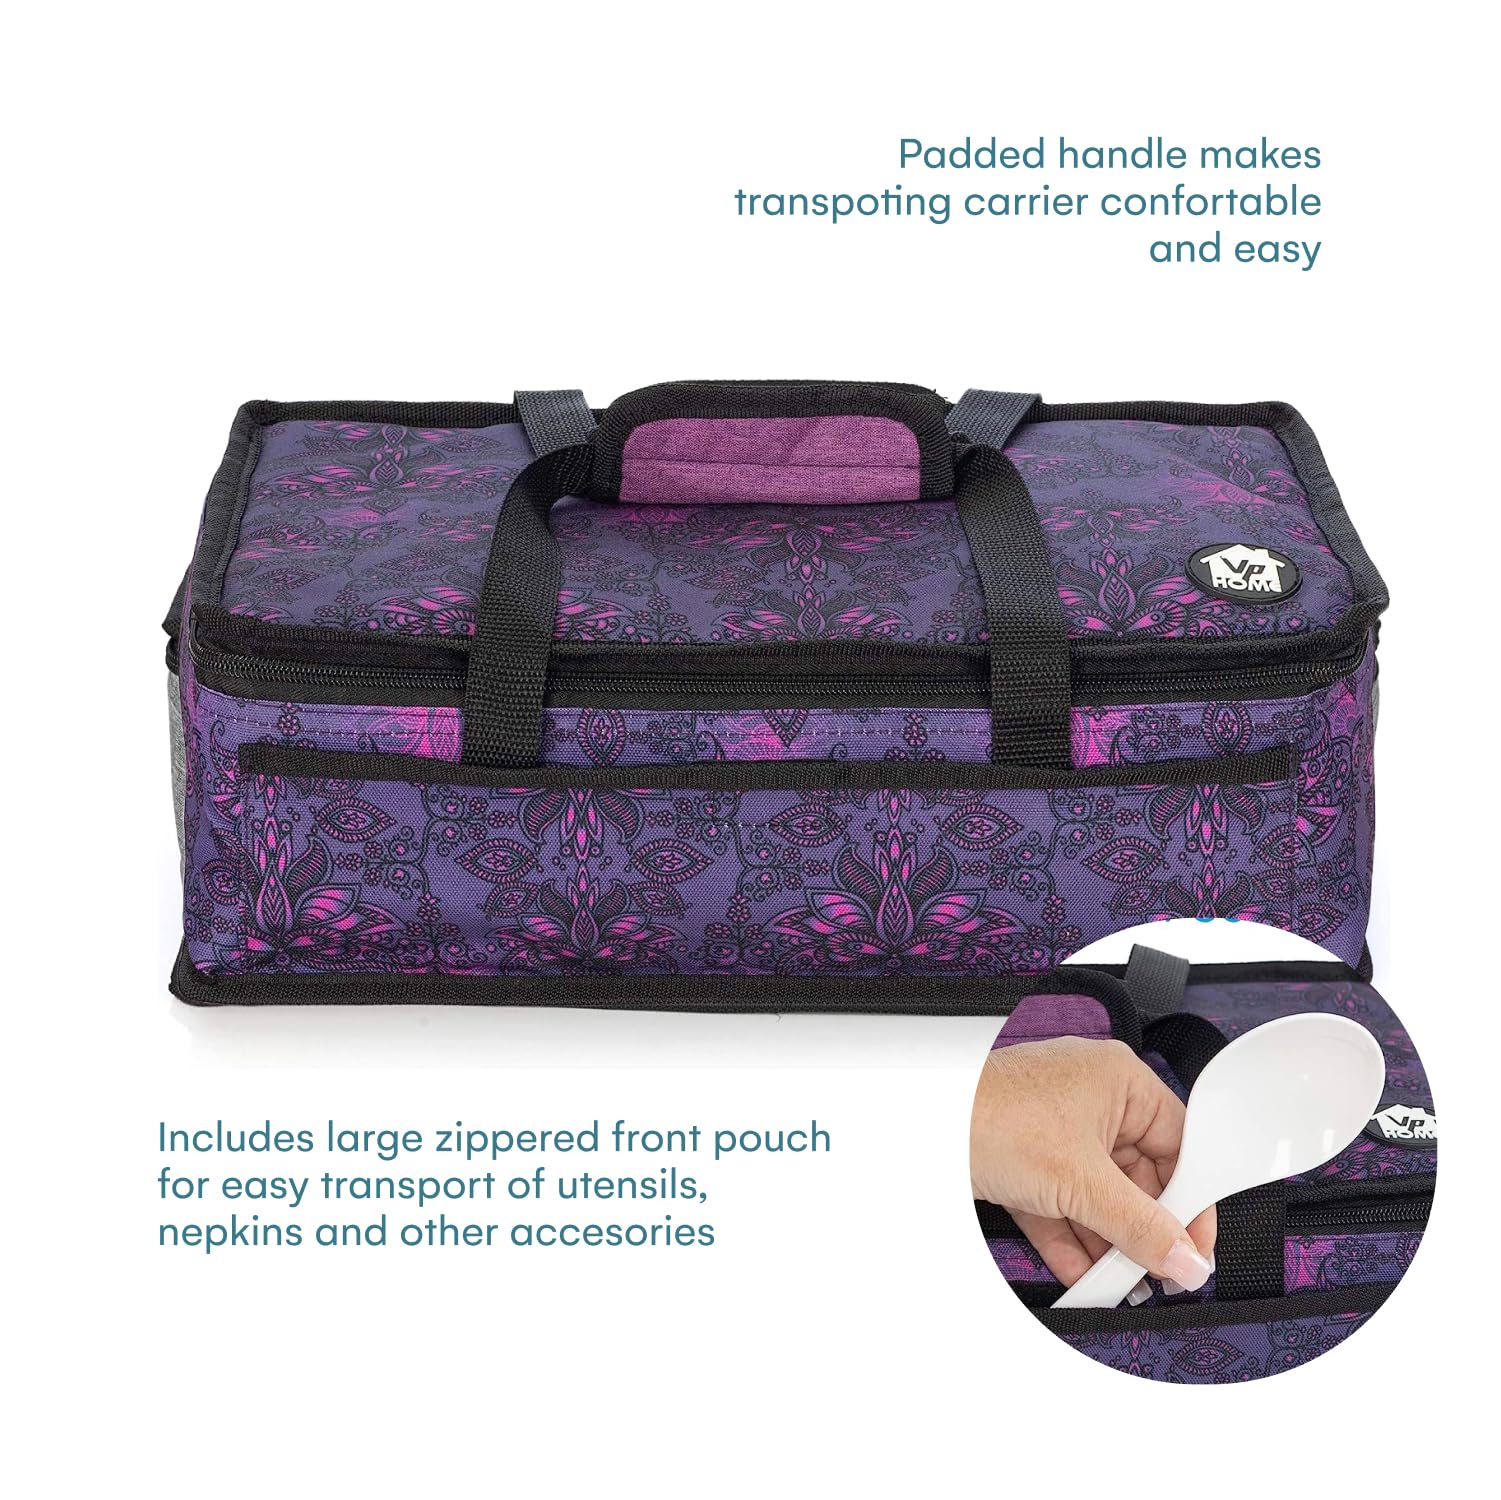 VP Home Insulated Casserole Carrier Travel Bag (Henna Tattoo) for Trip, Birthday Party, Mother's Day, Holiday, Christmas Day, Grocery Store, Supermarket, Outdoor Picnic etc